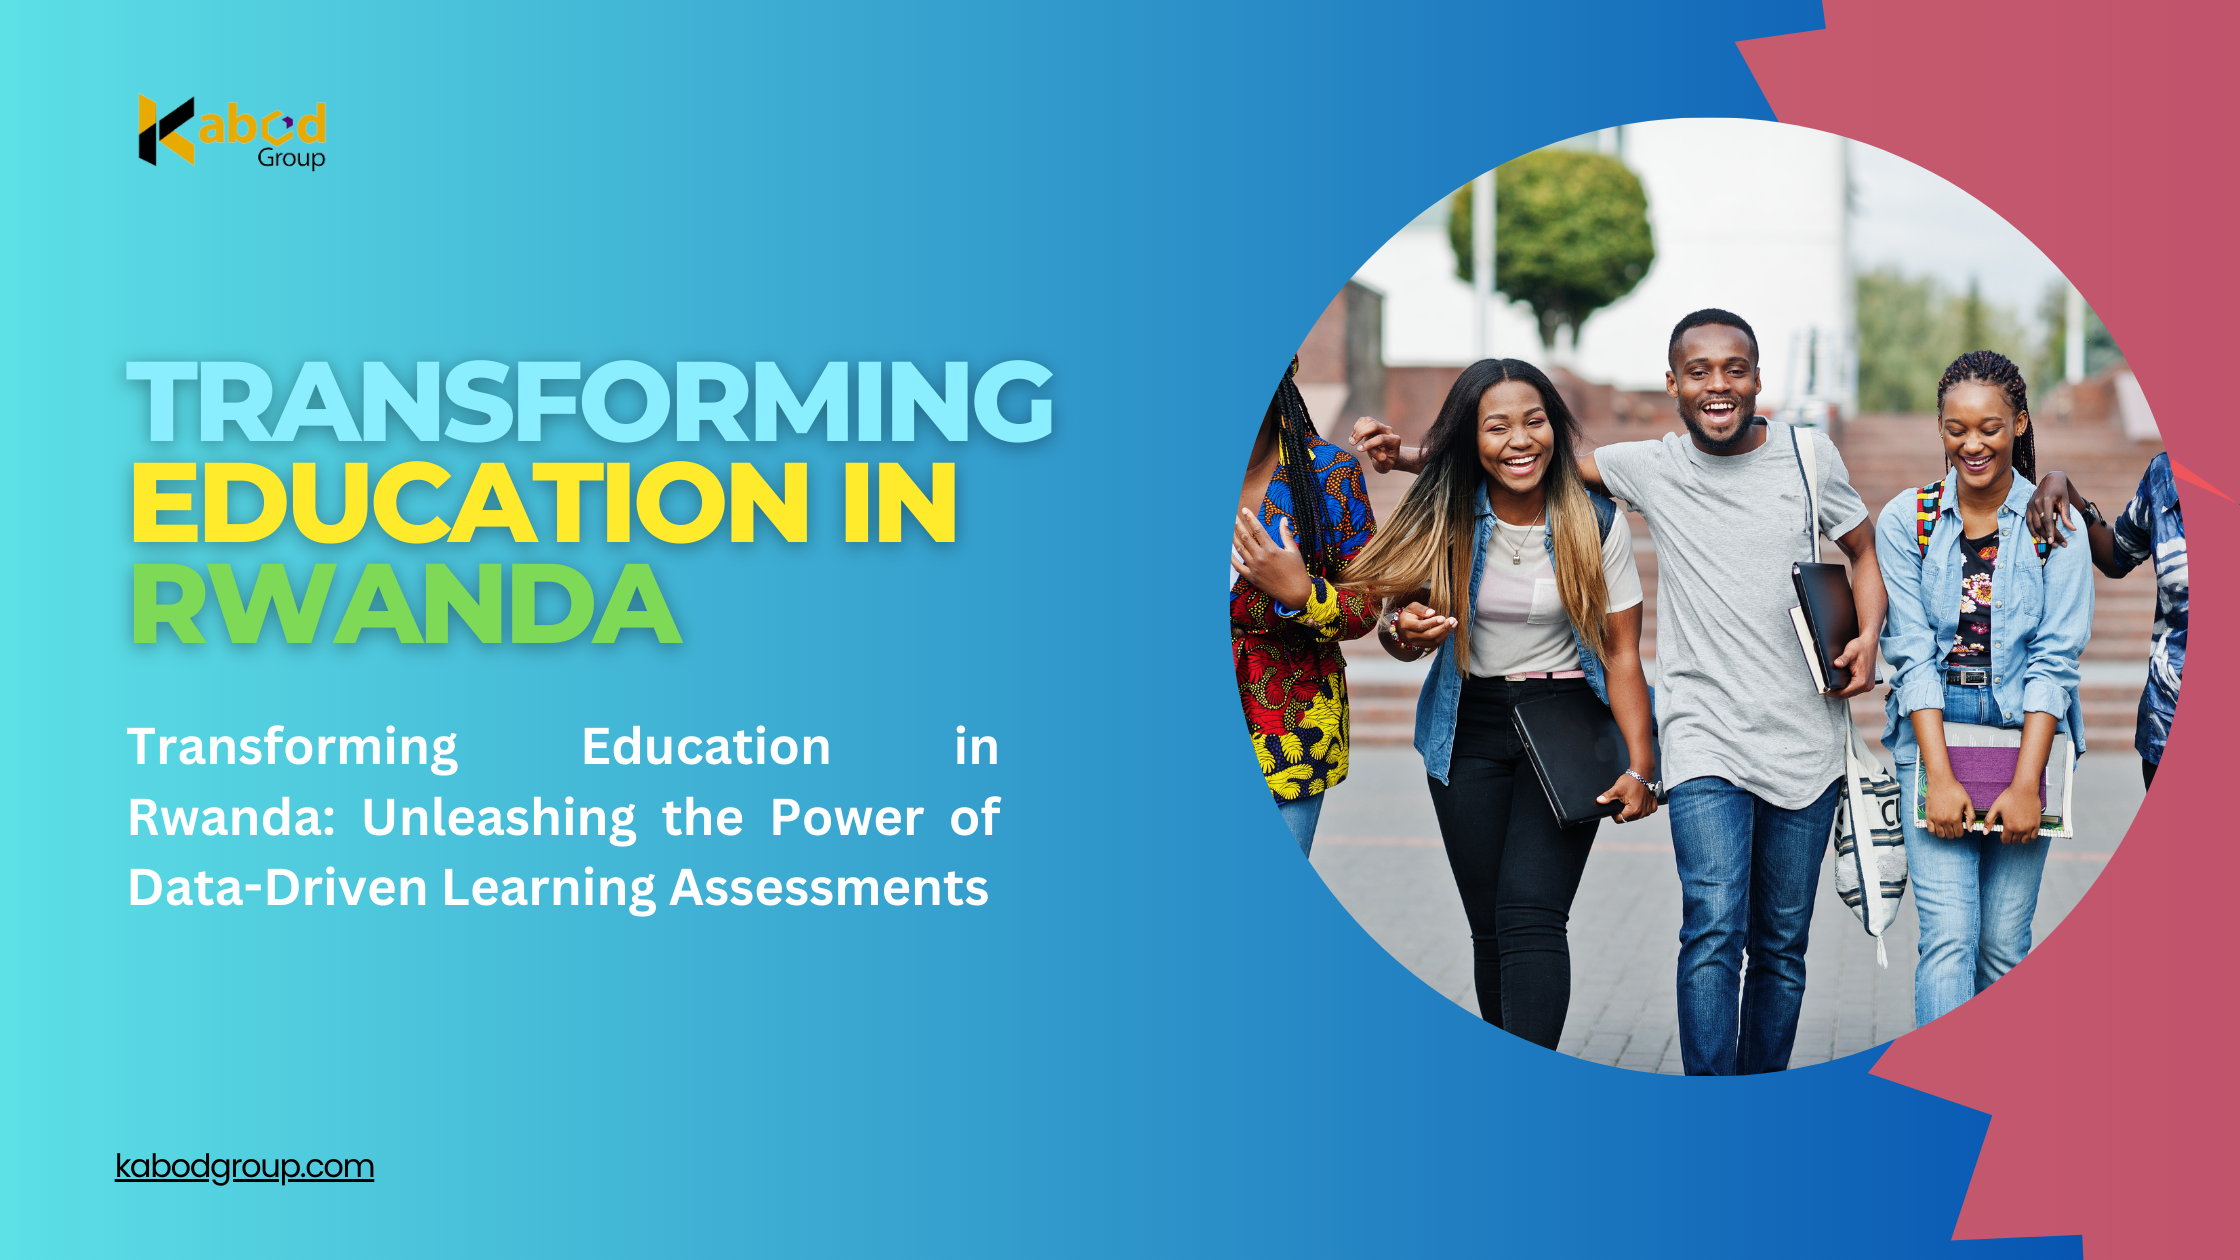 Transforming Education in Rwanda: Unleashing the Power of Data-Driven Learning Assessments